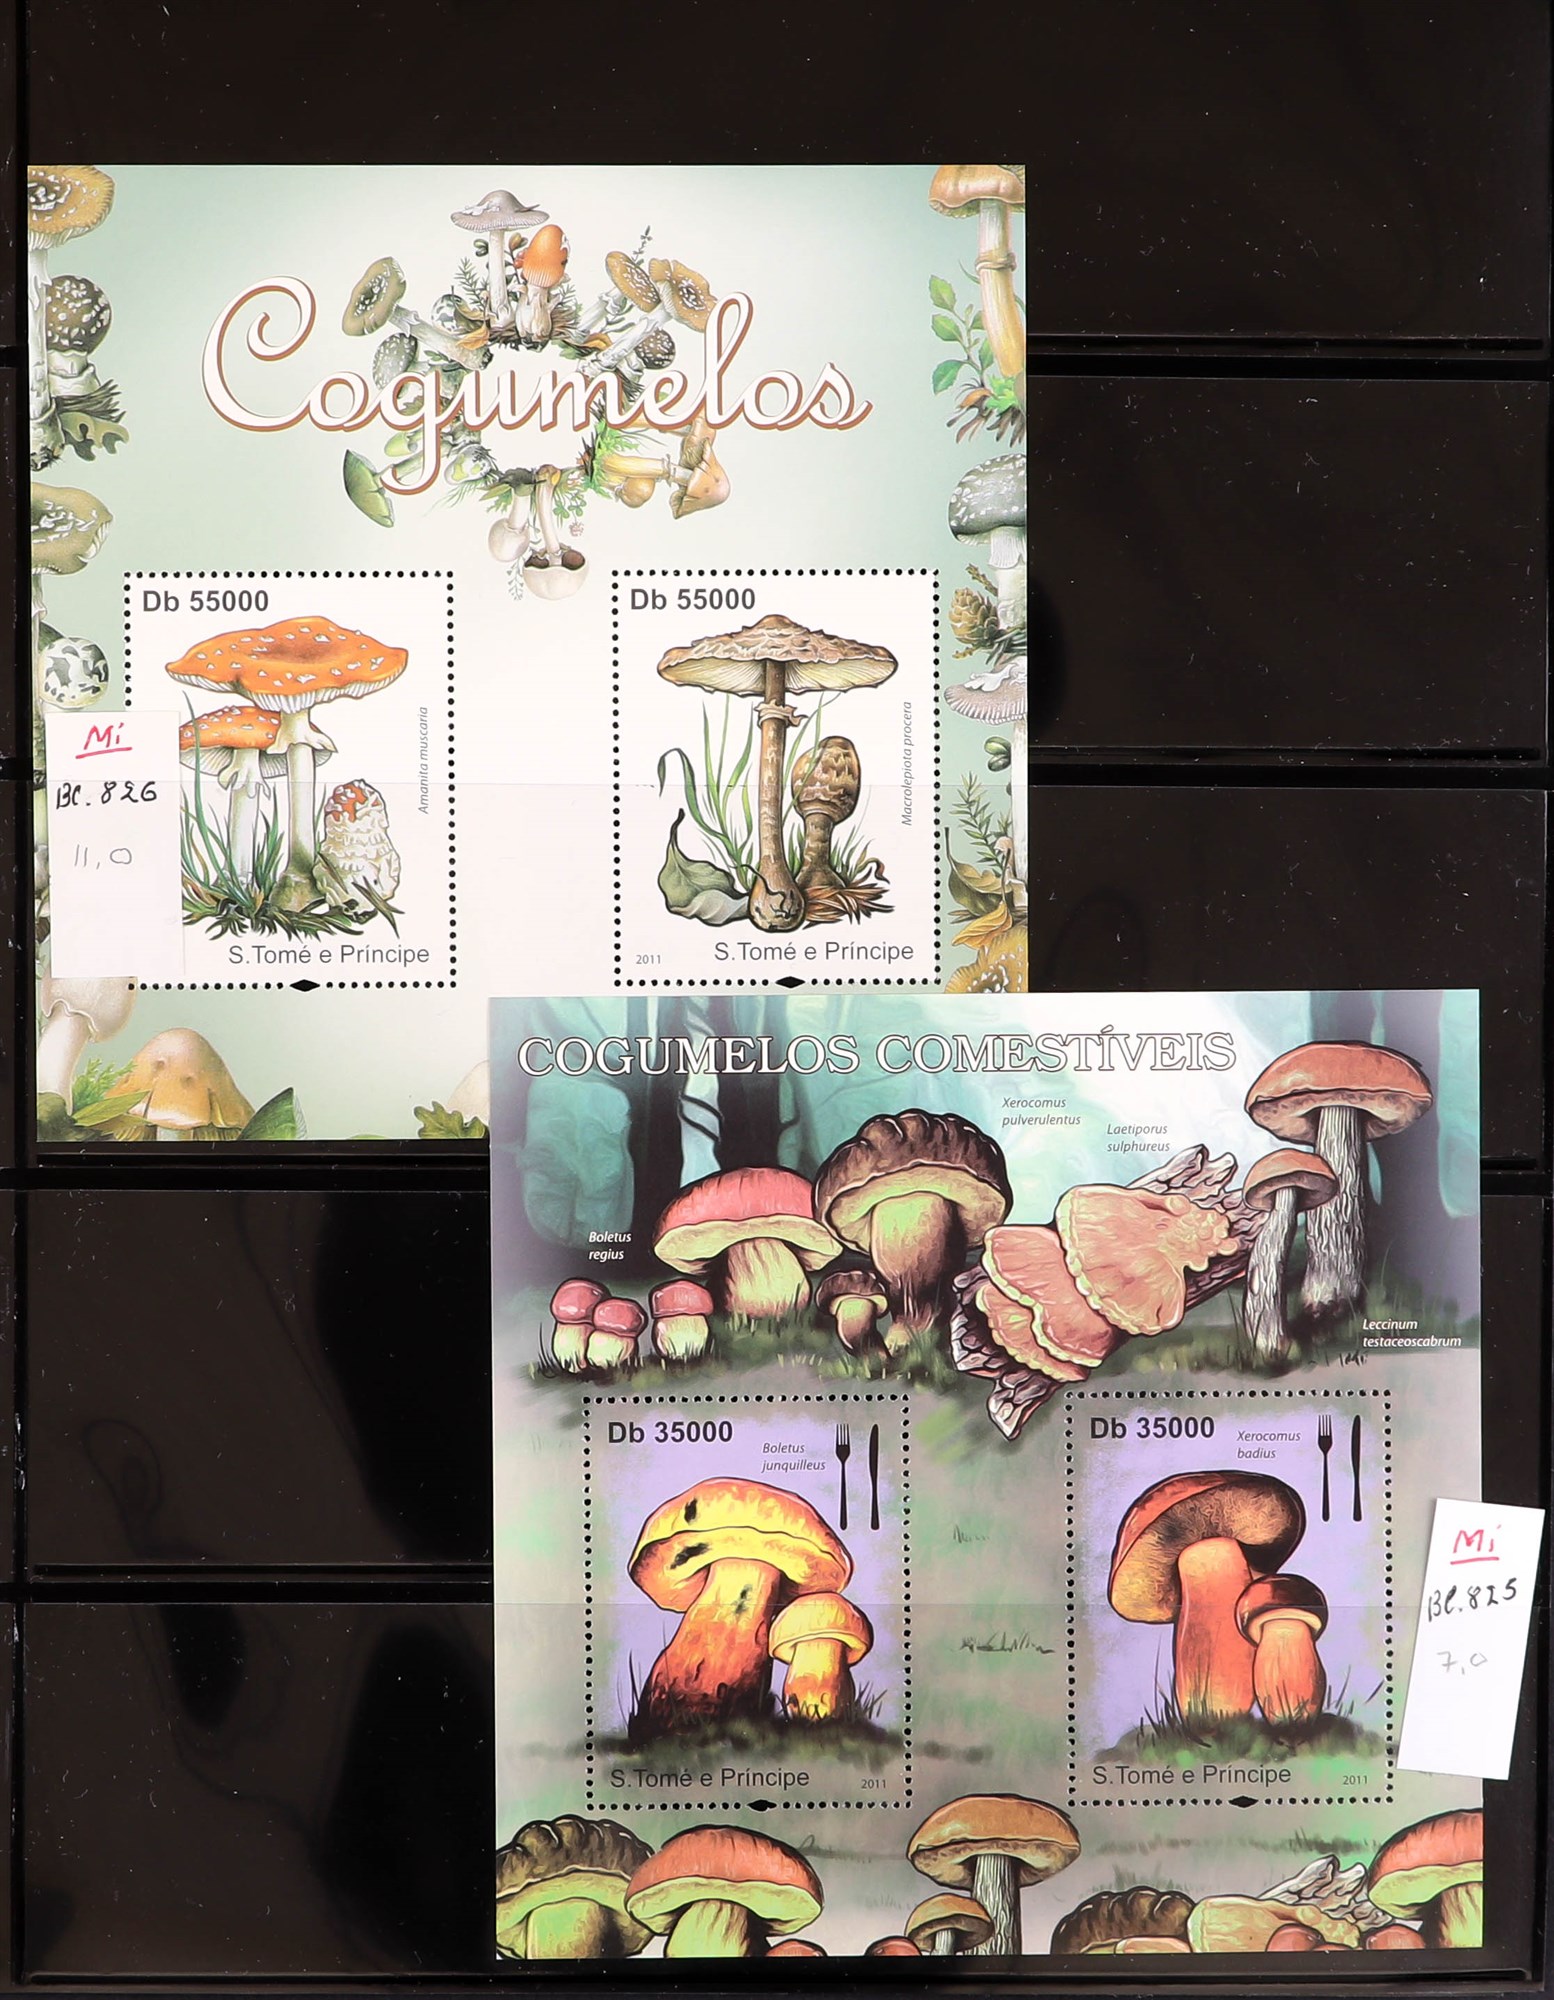 PORTUGUESE COLONIES FUNGI STAMPS OF ST THOMAS & PRINCE ISLANDS 1984 - 2014 never hinged mint - Image 24 of 30